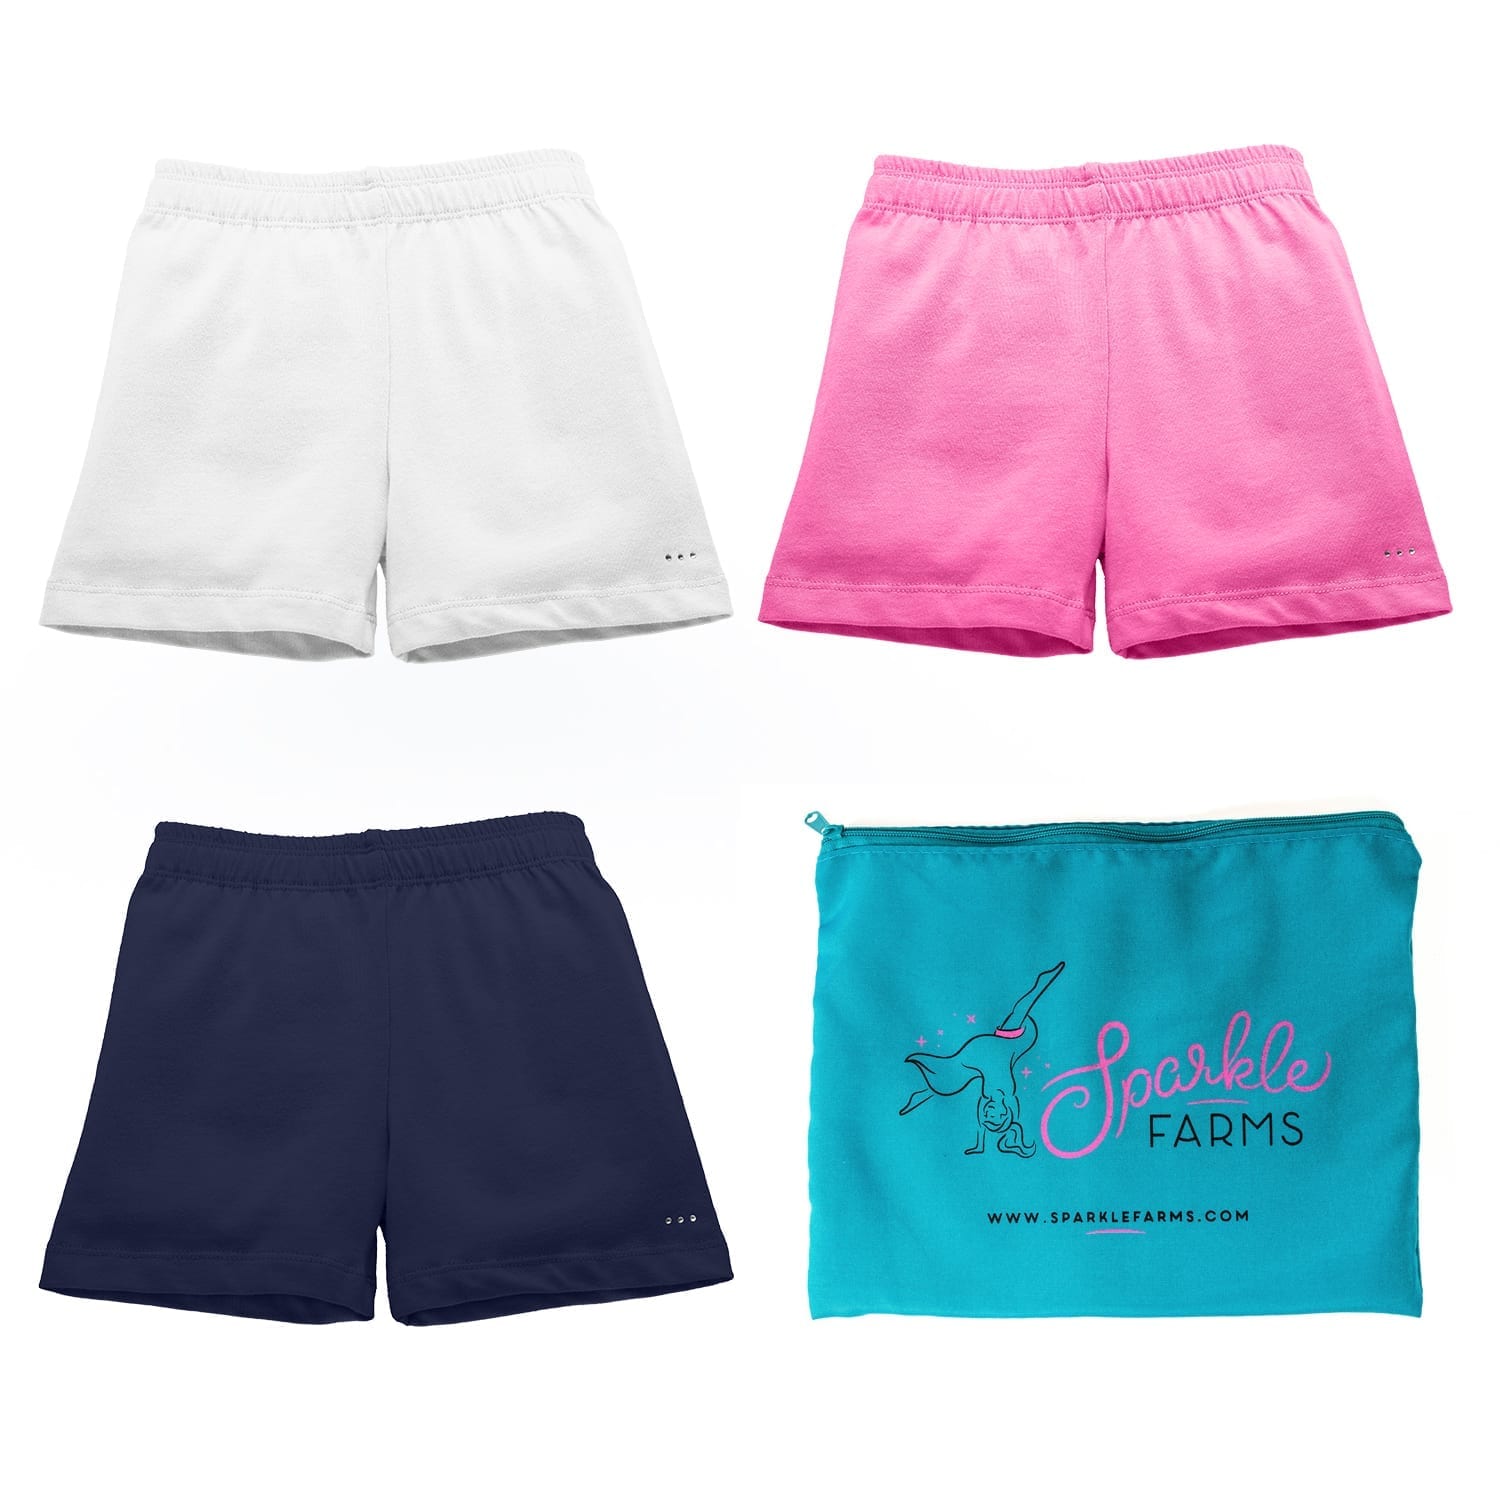 Girls Bike Shorts for Cartwheels and Playground Modesty - Multicolor Sets –  Sparkle Farms Apparel